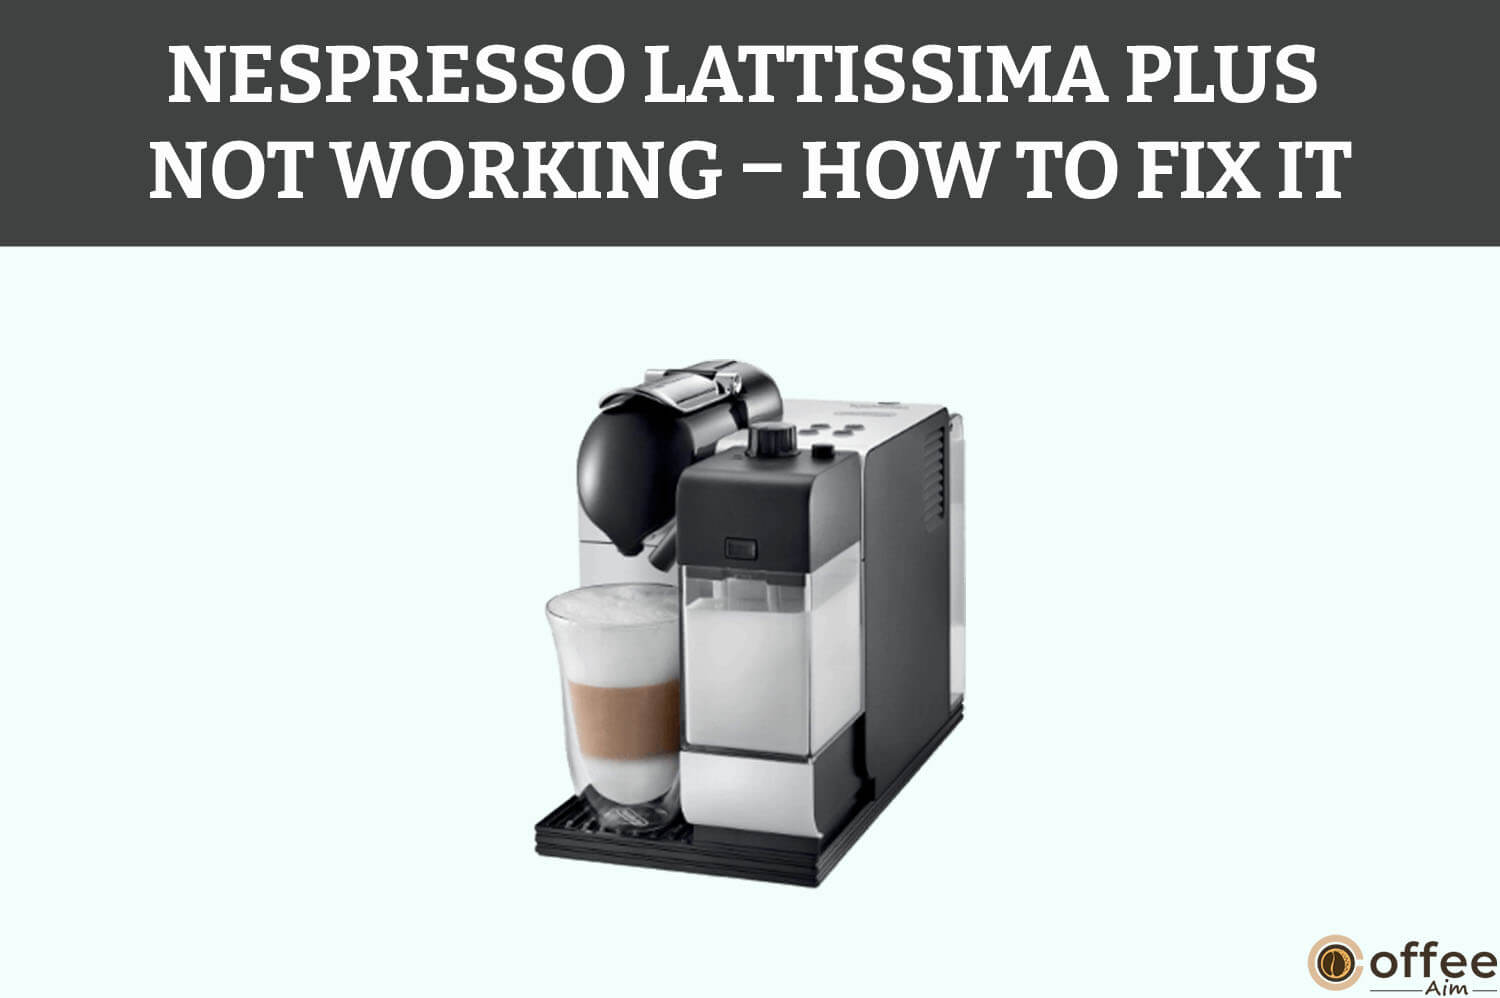 Featured image for the article "Nespresso Lattissima Plus Not Working – How to Fix It"